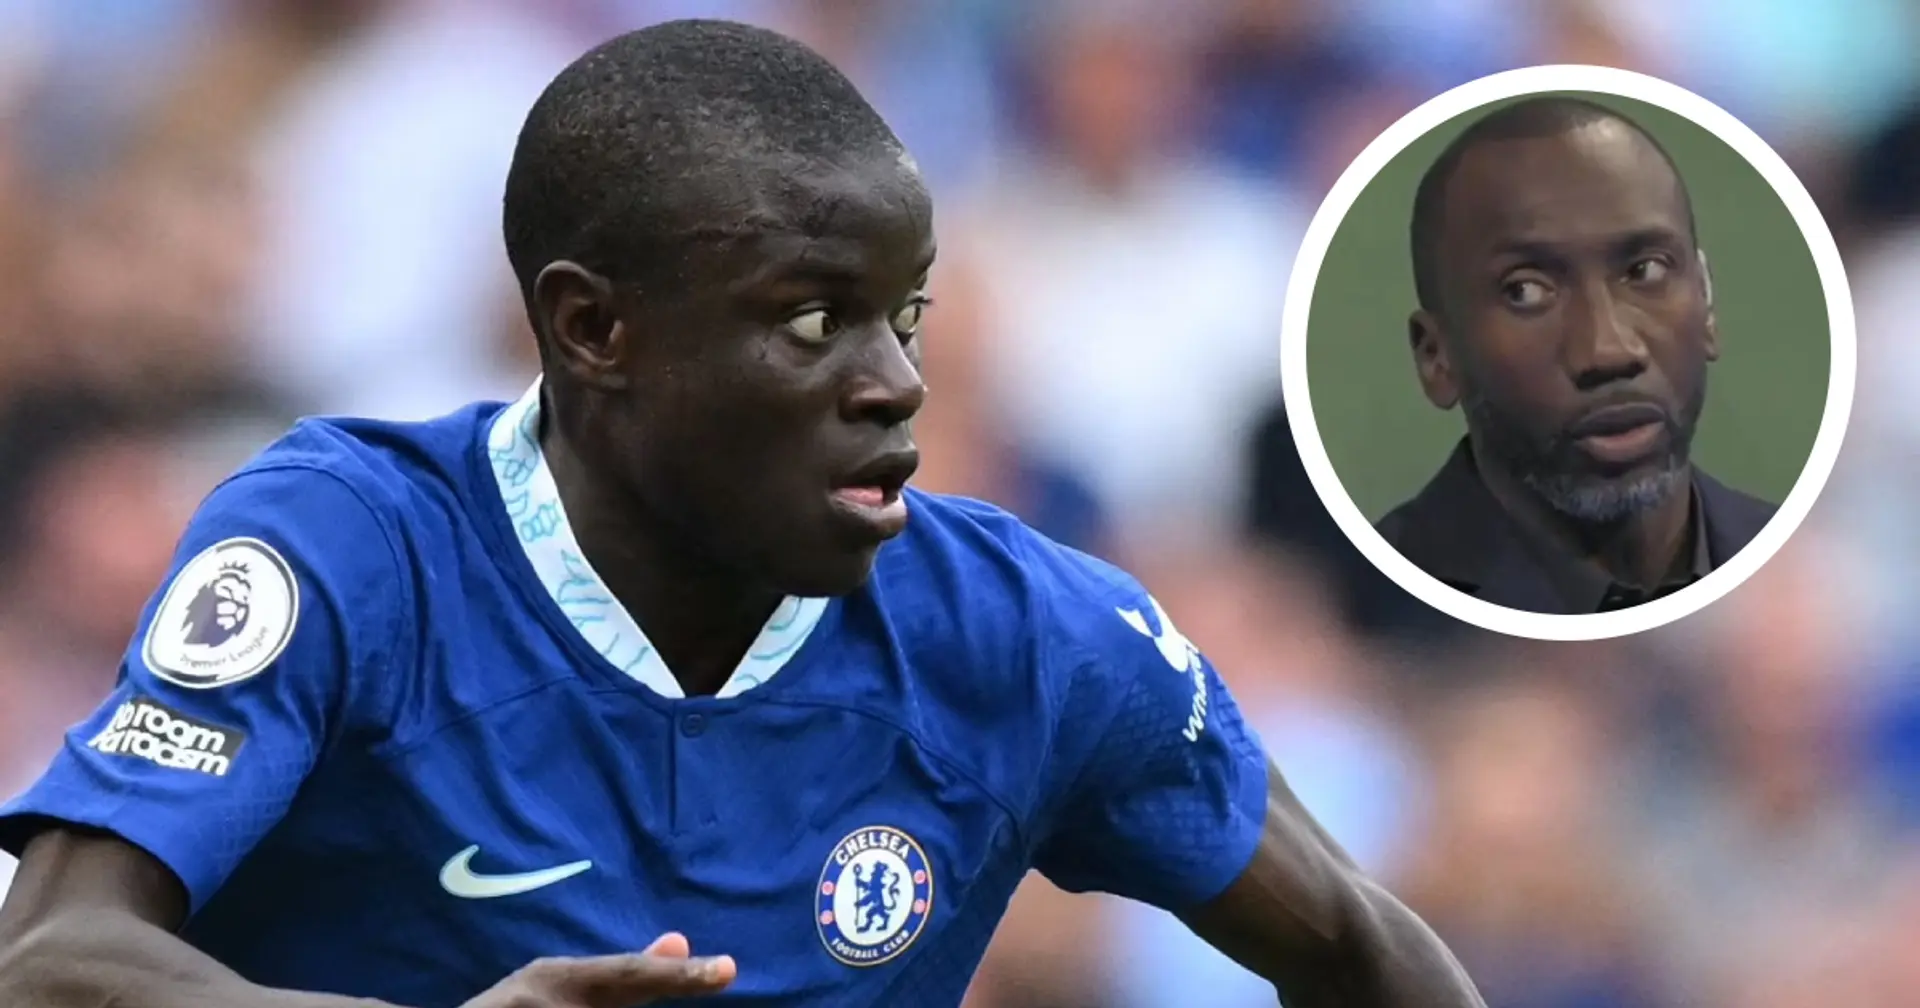 'Kante deserves it': Hasselbaink urges Chelsea to give N'Golo new deal